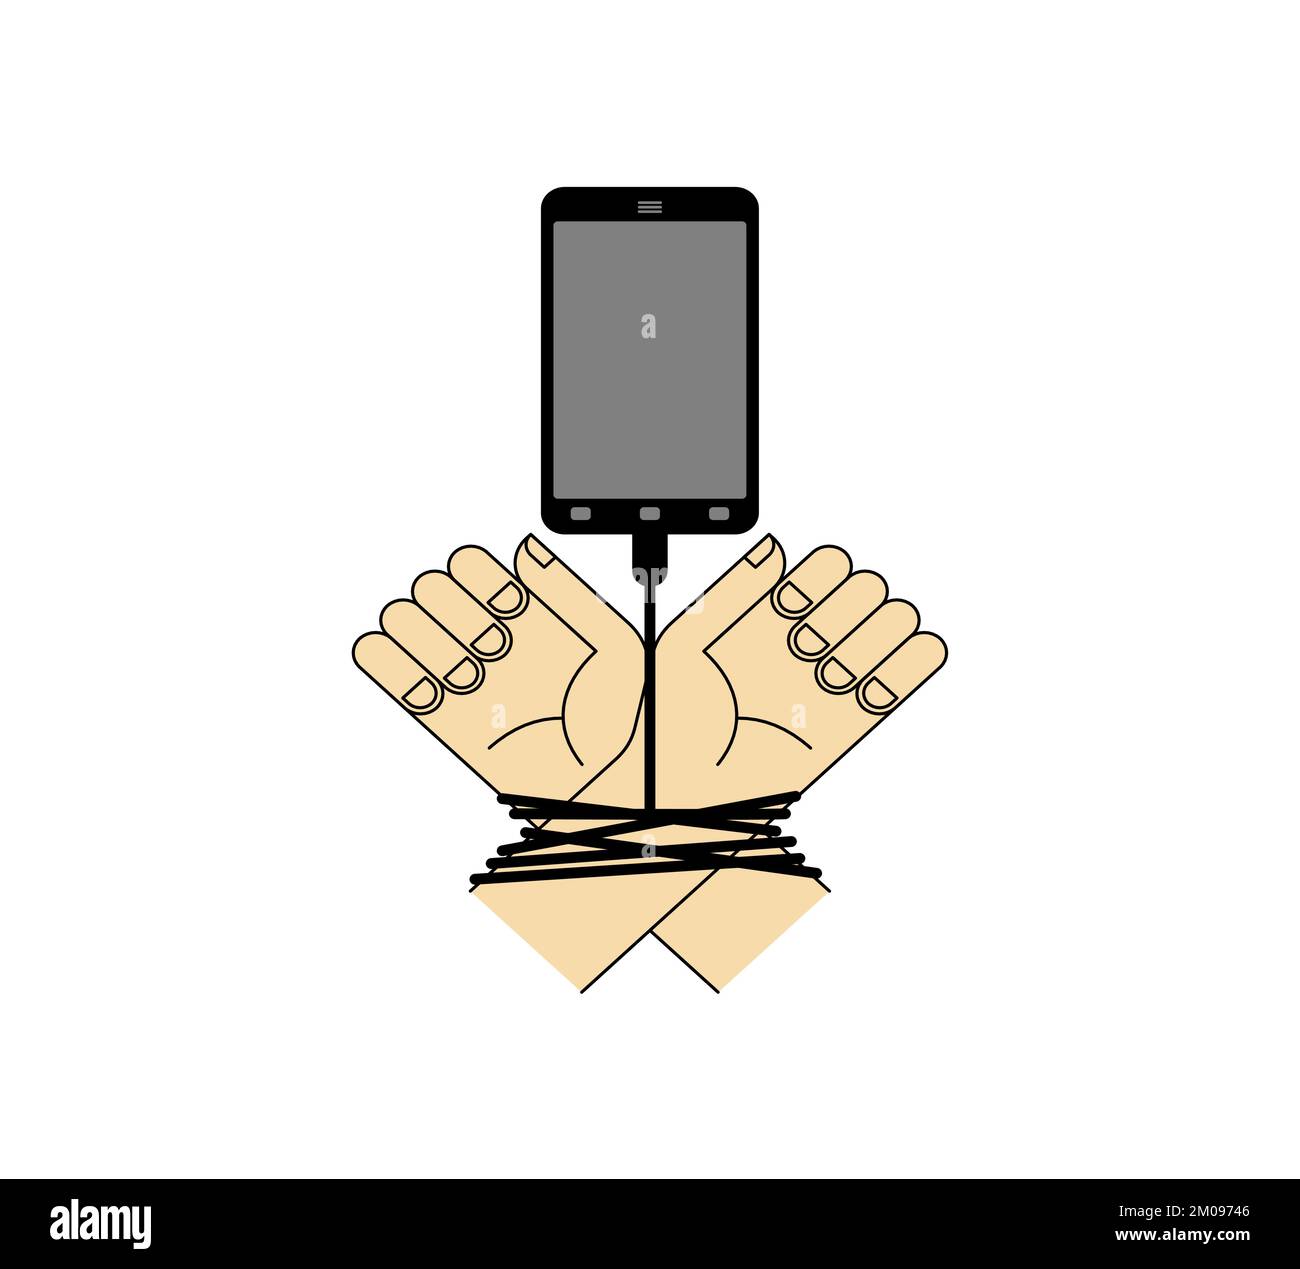 Smartphone ties hands. Concept modern gadget is a trap. phone addiction Stock Vector